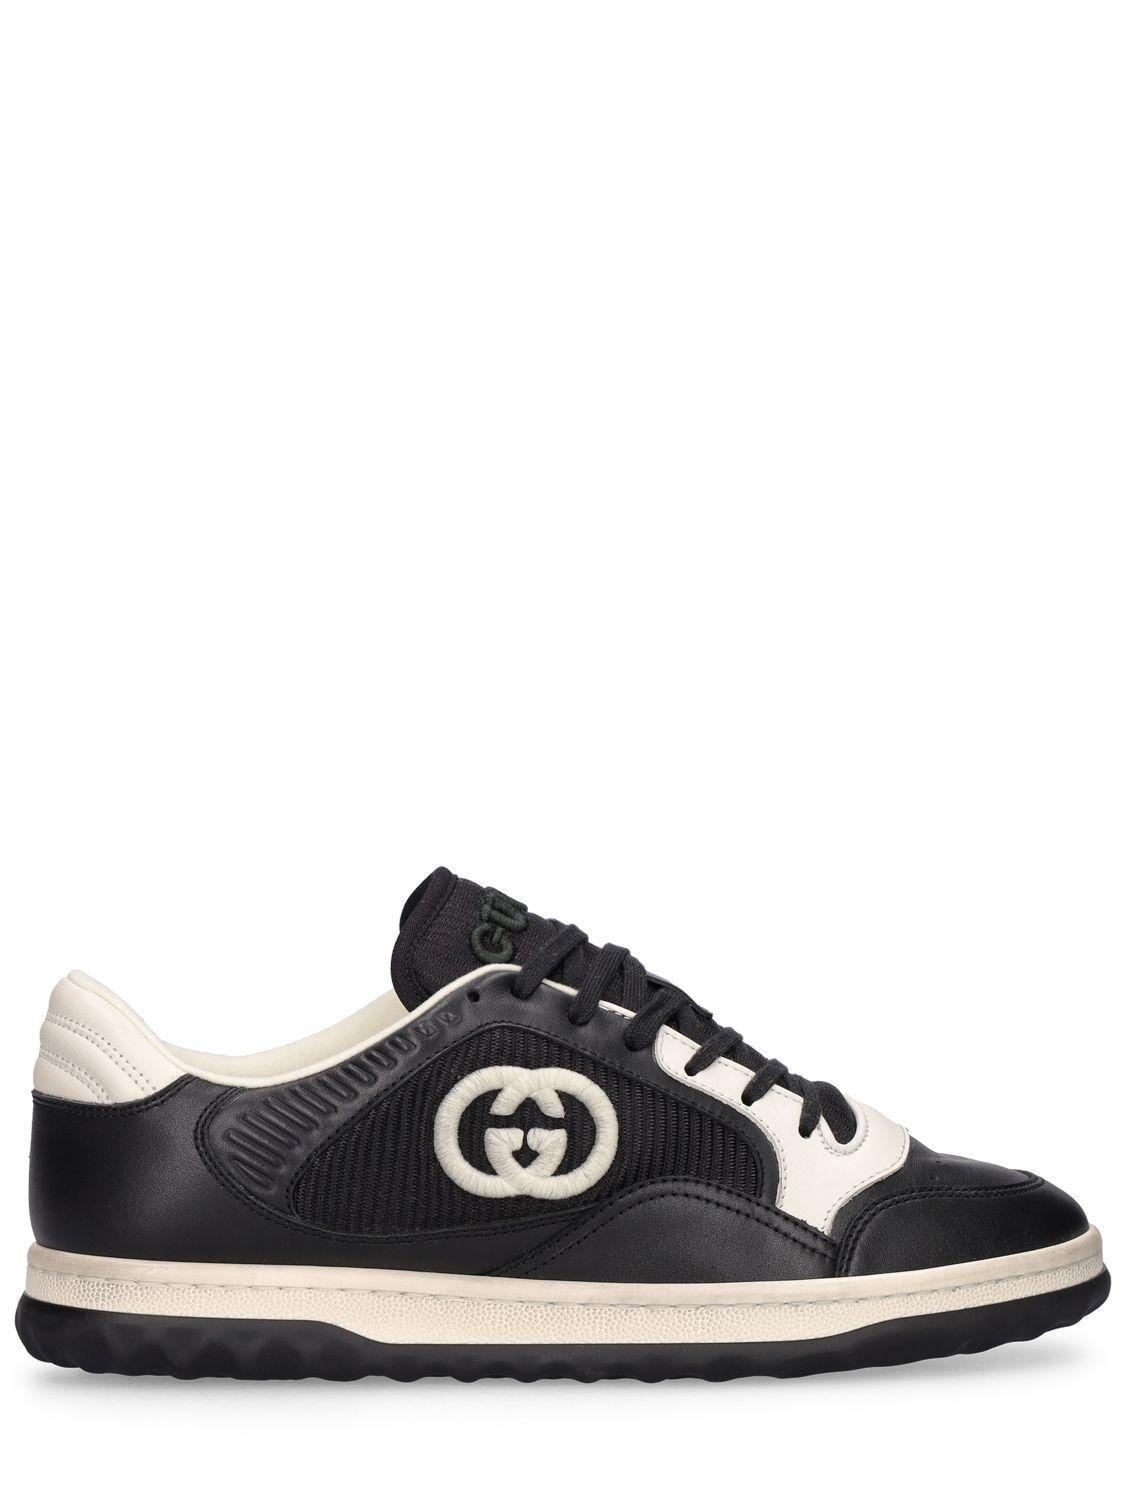 Gucci Mac80 Leather Sneakers in Black for Men | Lyst